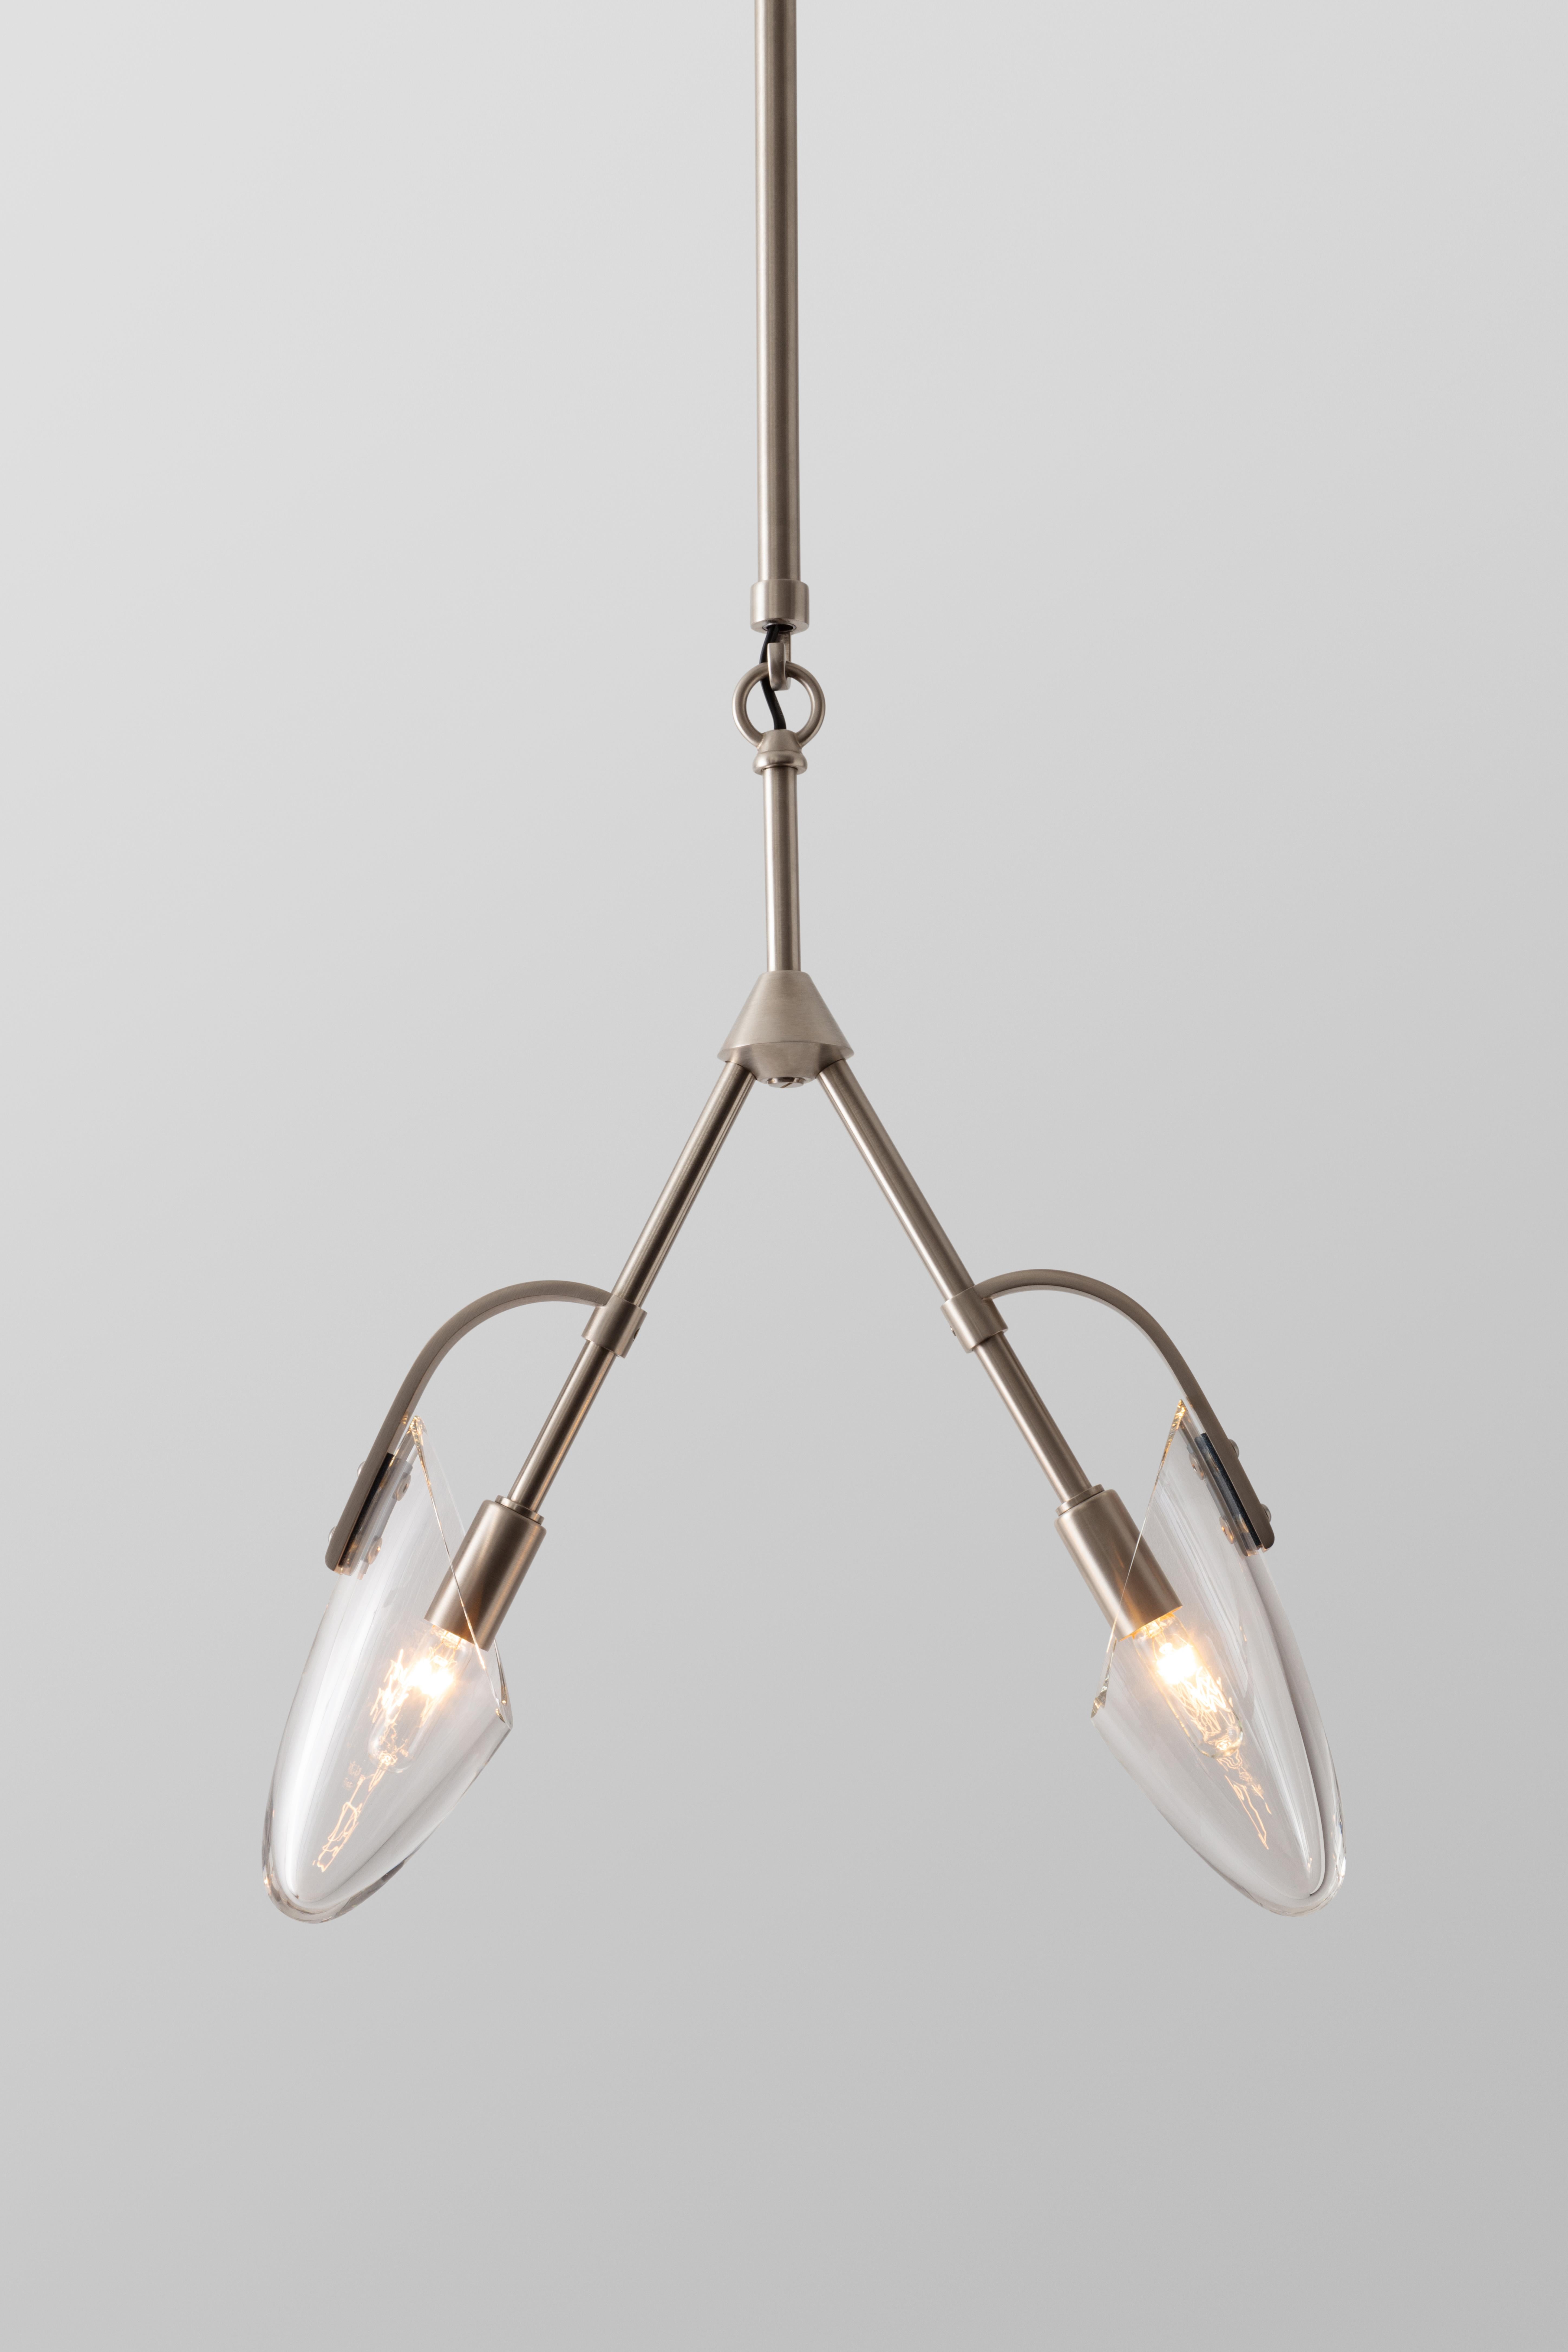 The Kinesis Pendant is part of a modular lighting system. This pendant has two mouth-blown glass diffusers and is available in a variety of metal finishes. The details of Kinesis owe their beauty to a merging of traditional hand craftsmanship and